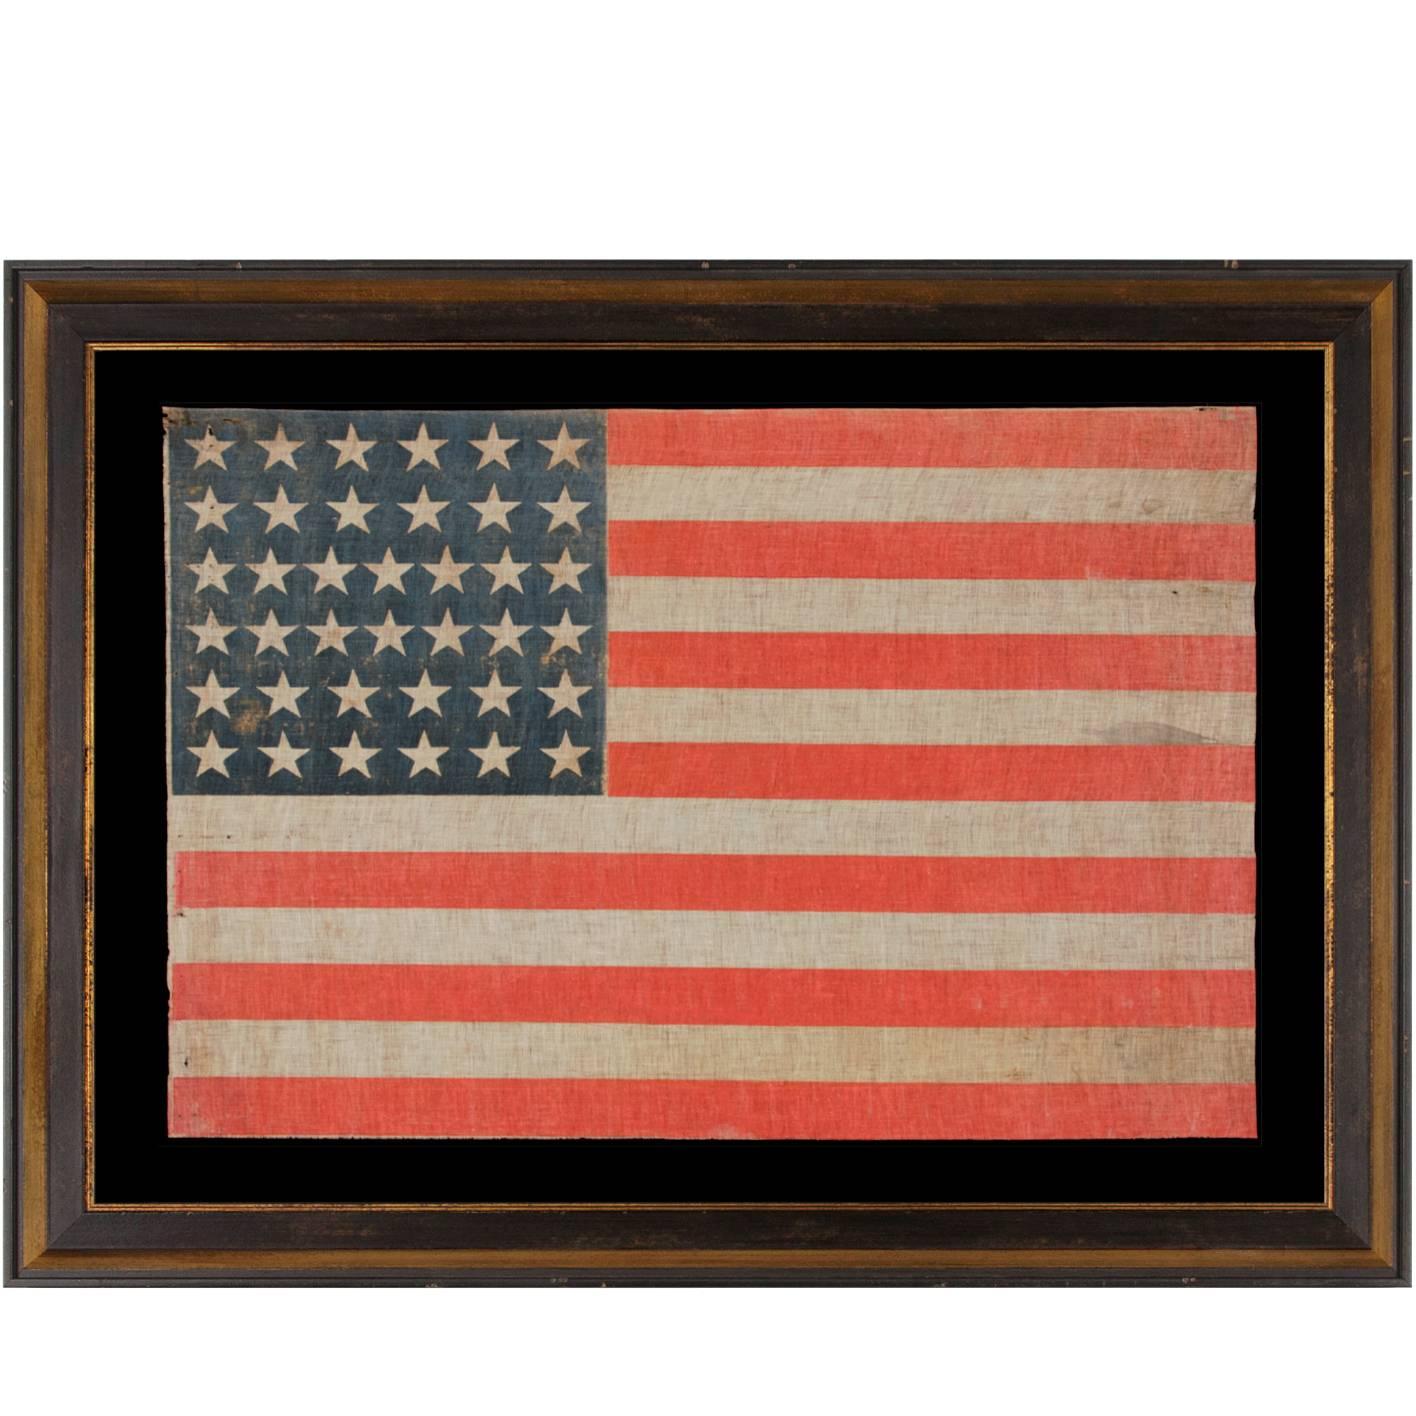 38 Stars on a Parade Flag with Large Scale and Beautiful Persimmon Red Stripes